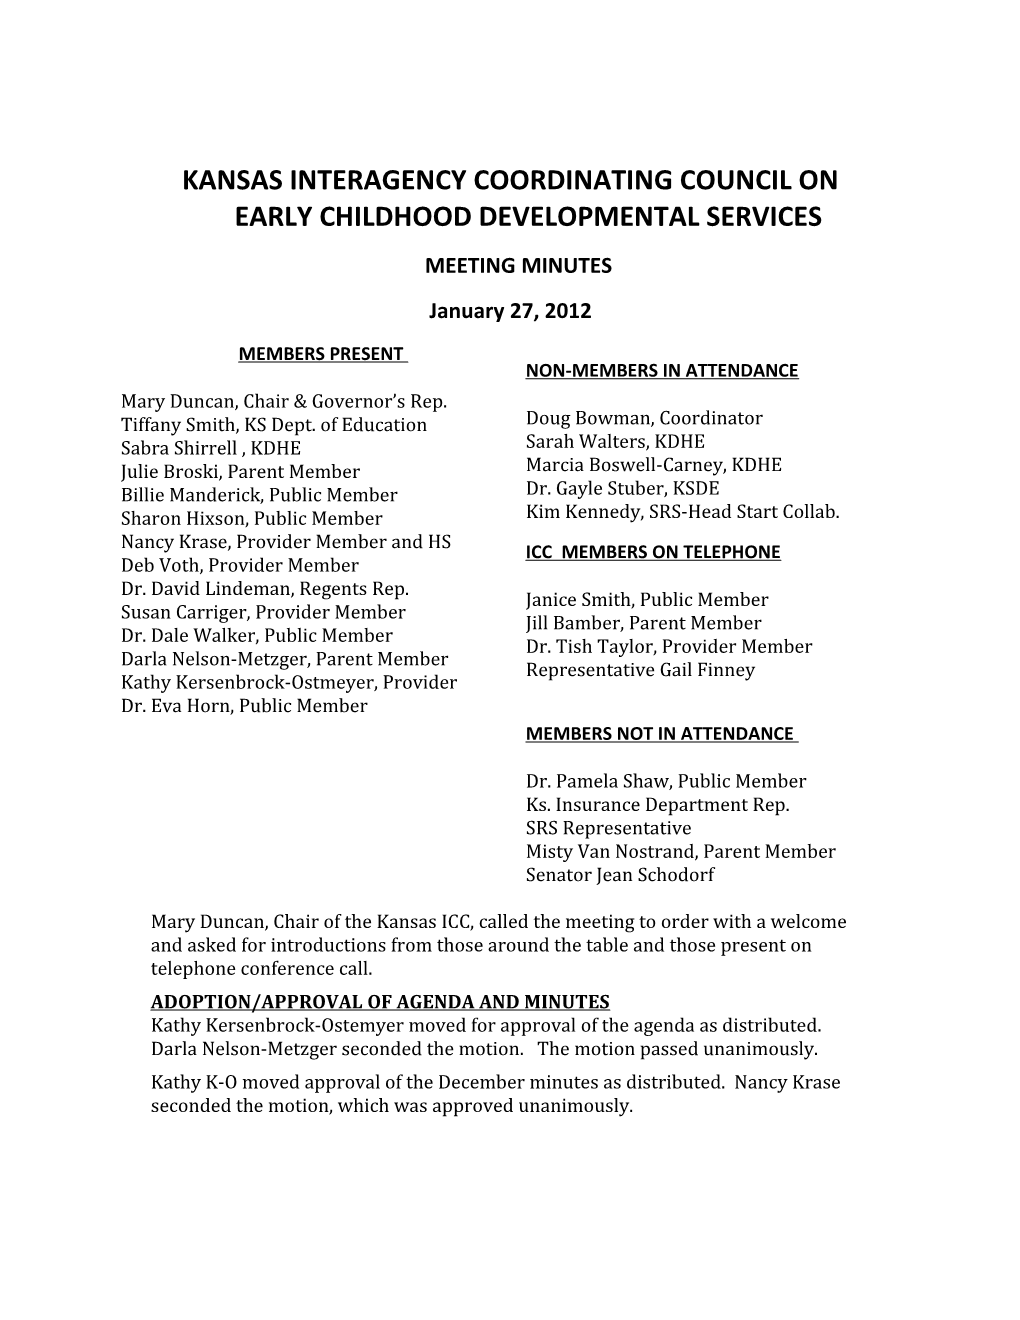 Kansas Interagency Coordinating Council on Early Childhood Developmental Services